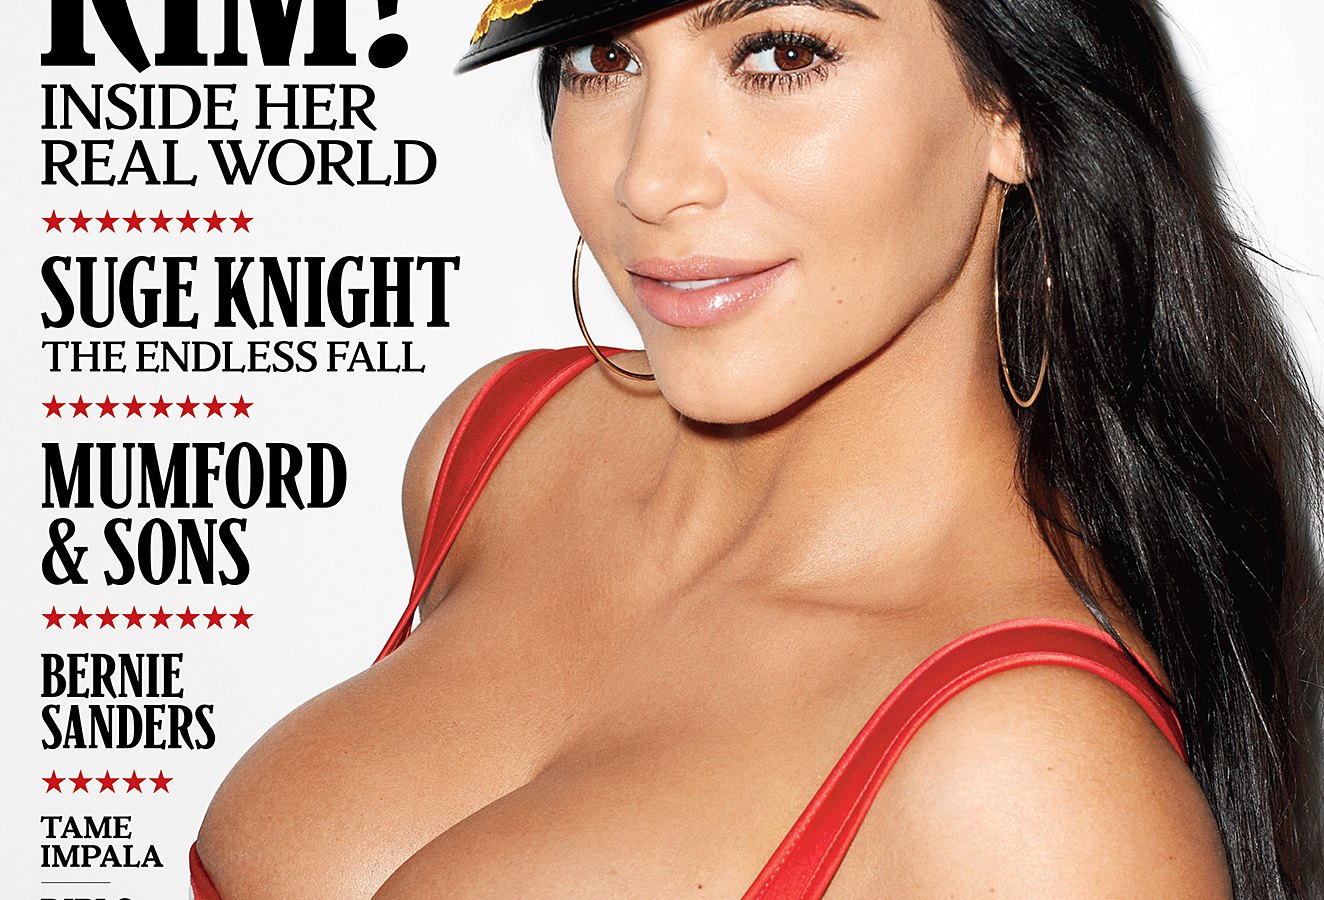 Kim Kardashian on the cover of Rolling Stone